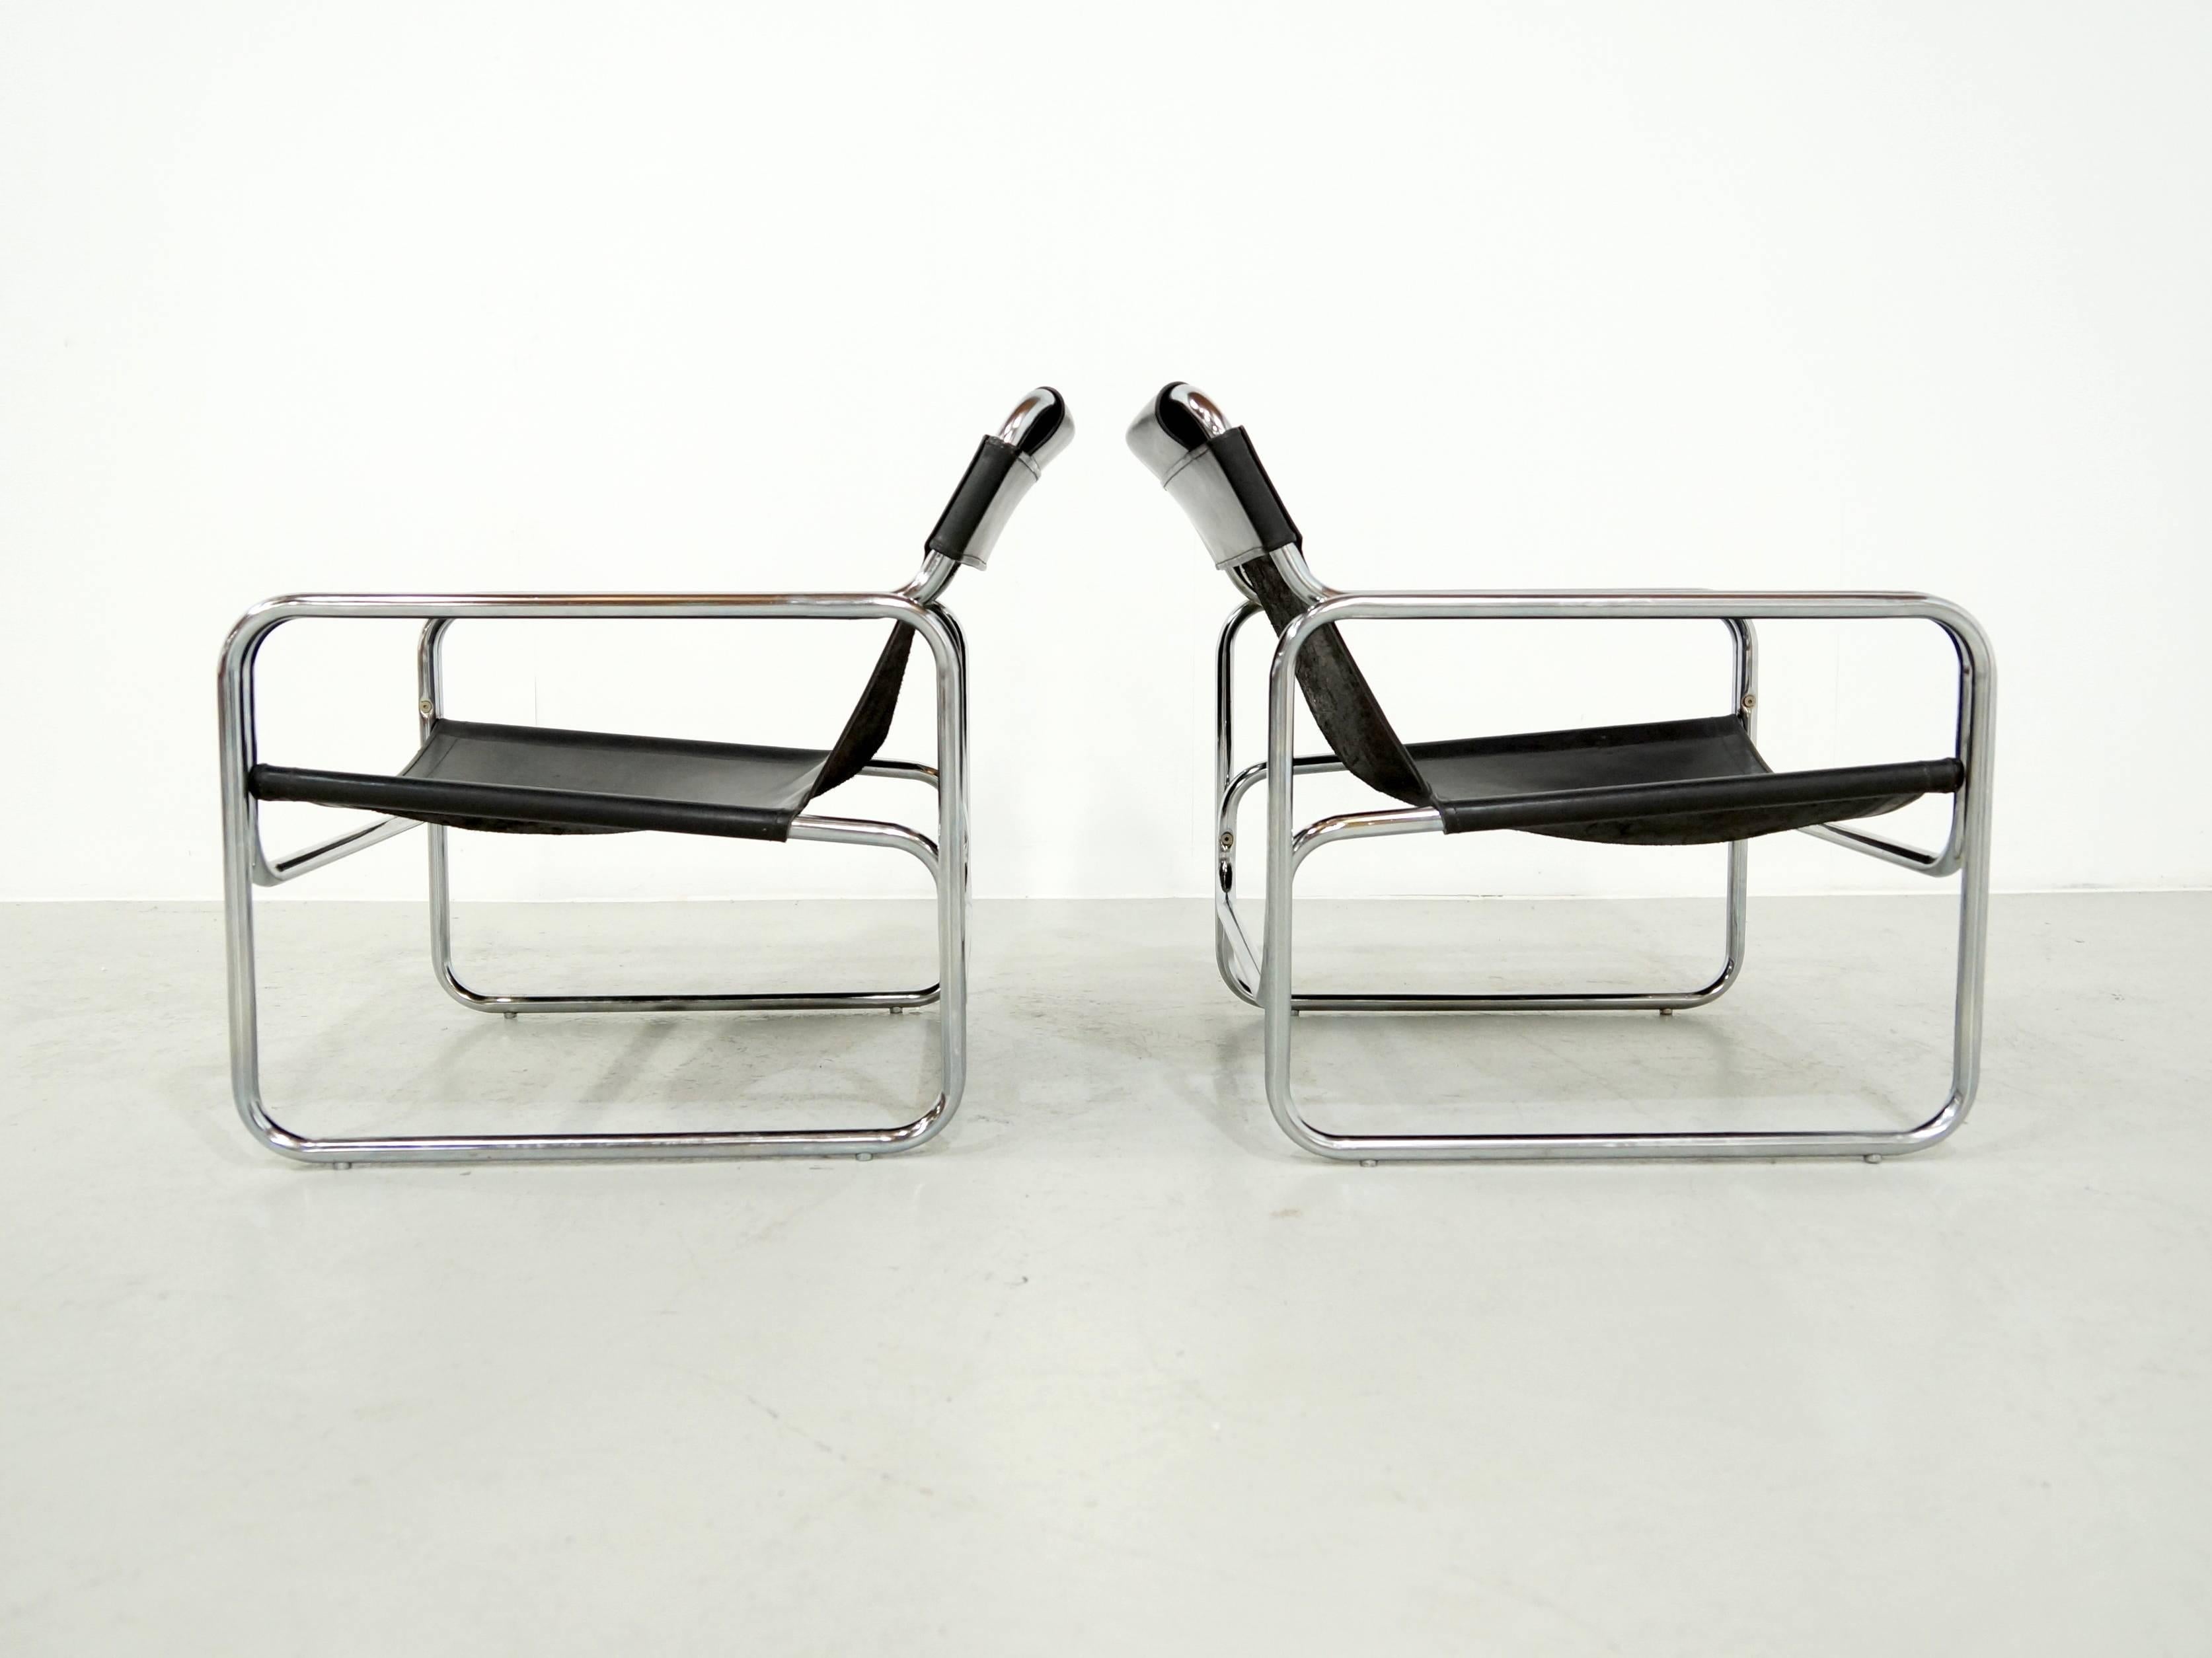 A very nice pair of black leather lounge chairs, Model Attico, designed by Antonello Mosca, Italy, 1970. Chrome tubular frames and thick black leather seats. Very good condition. Literature: Modern Furniture Designs 1950-1980, Klaus-Jurgen Sembach,